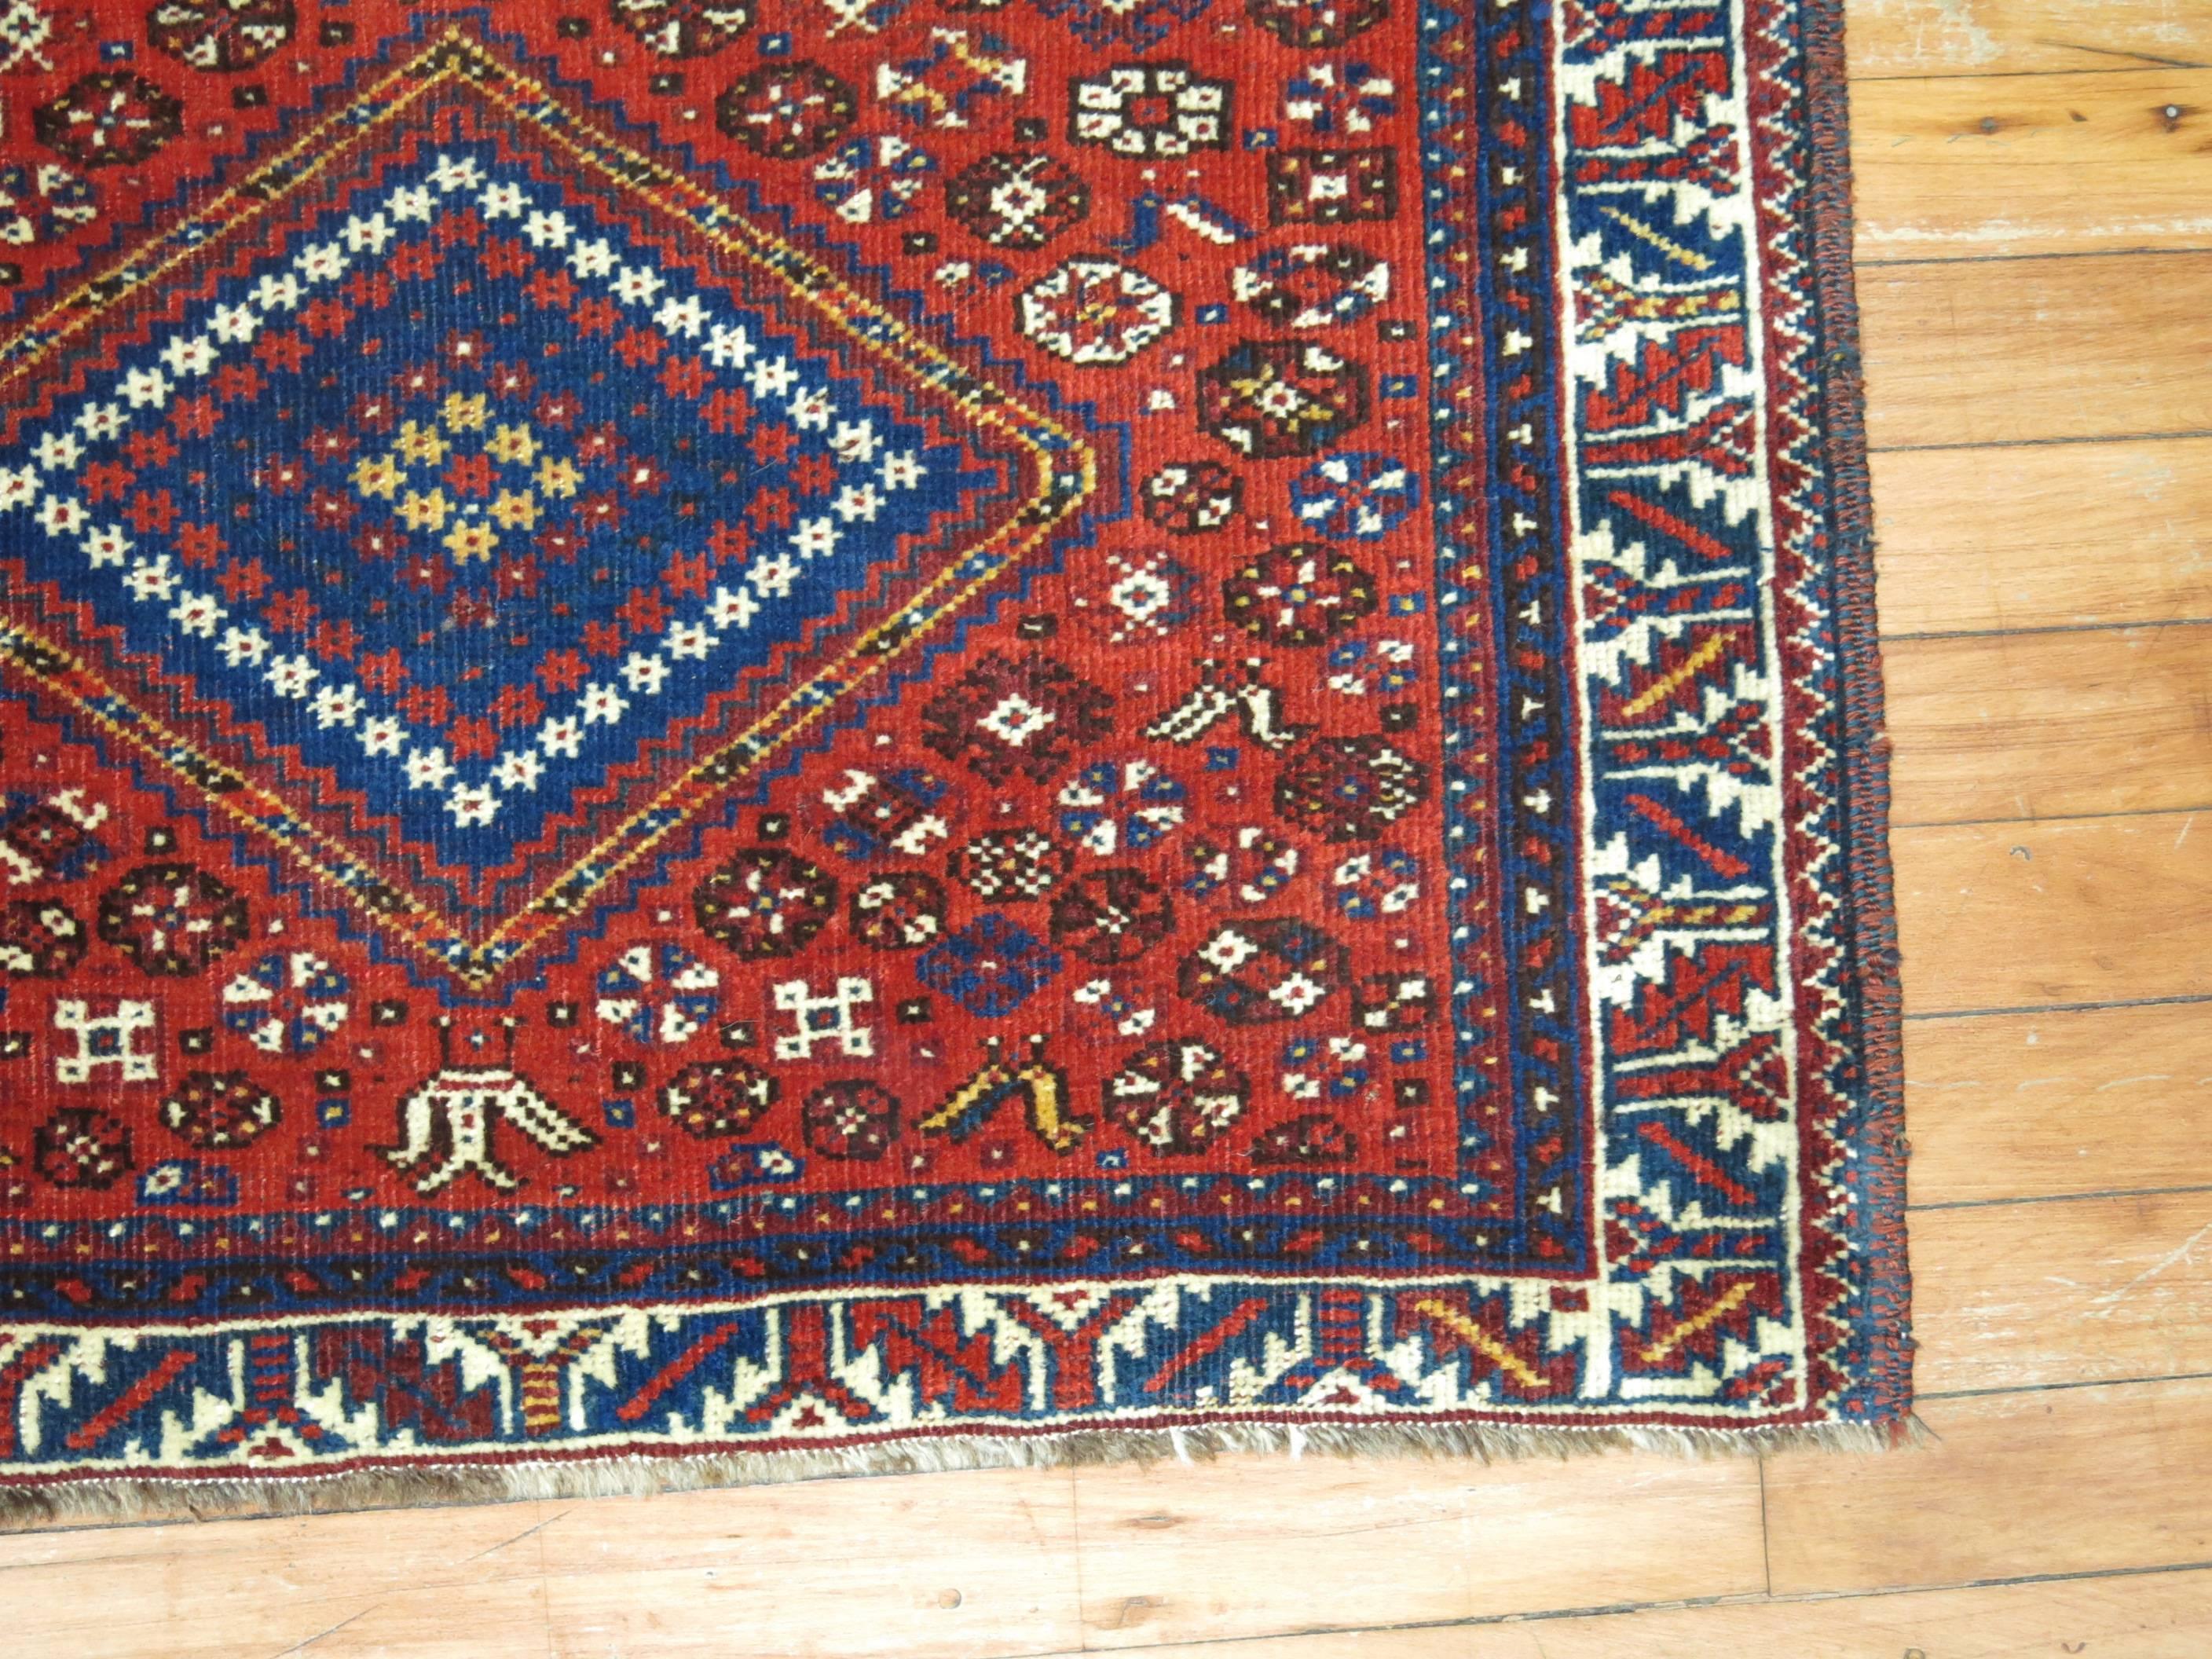 An antique Persian rug mat woven in city of Afshar in Northwest Persia,

circa 1930. Measures: 1'9